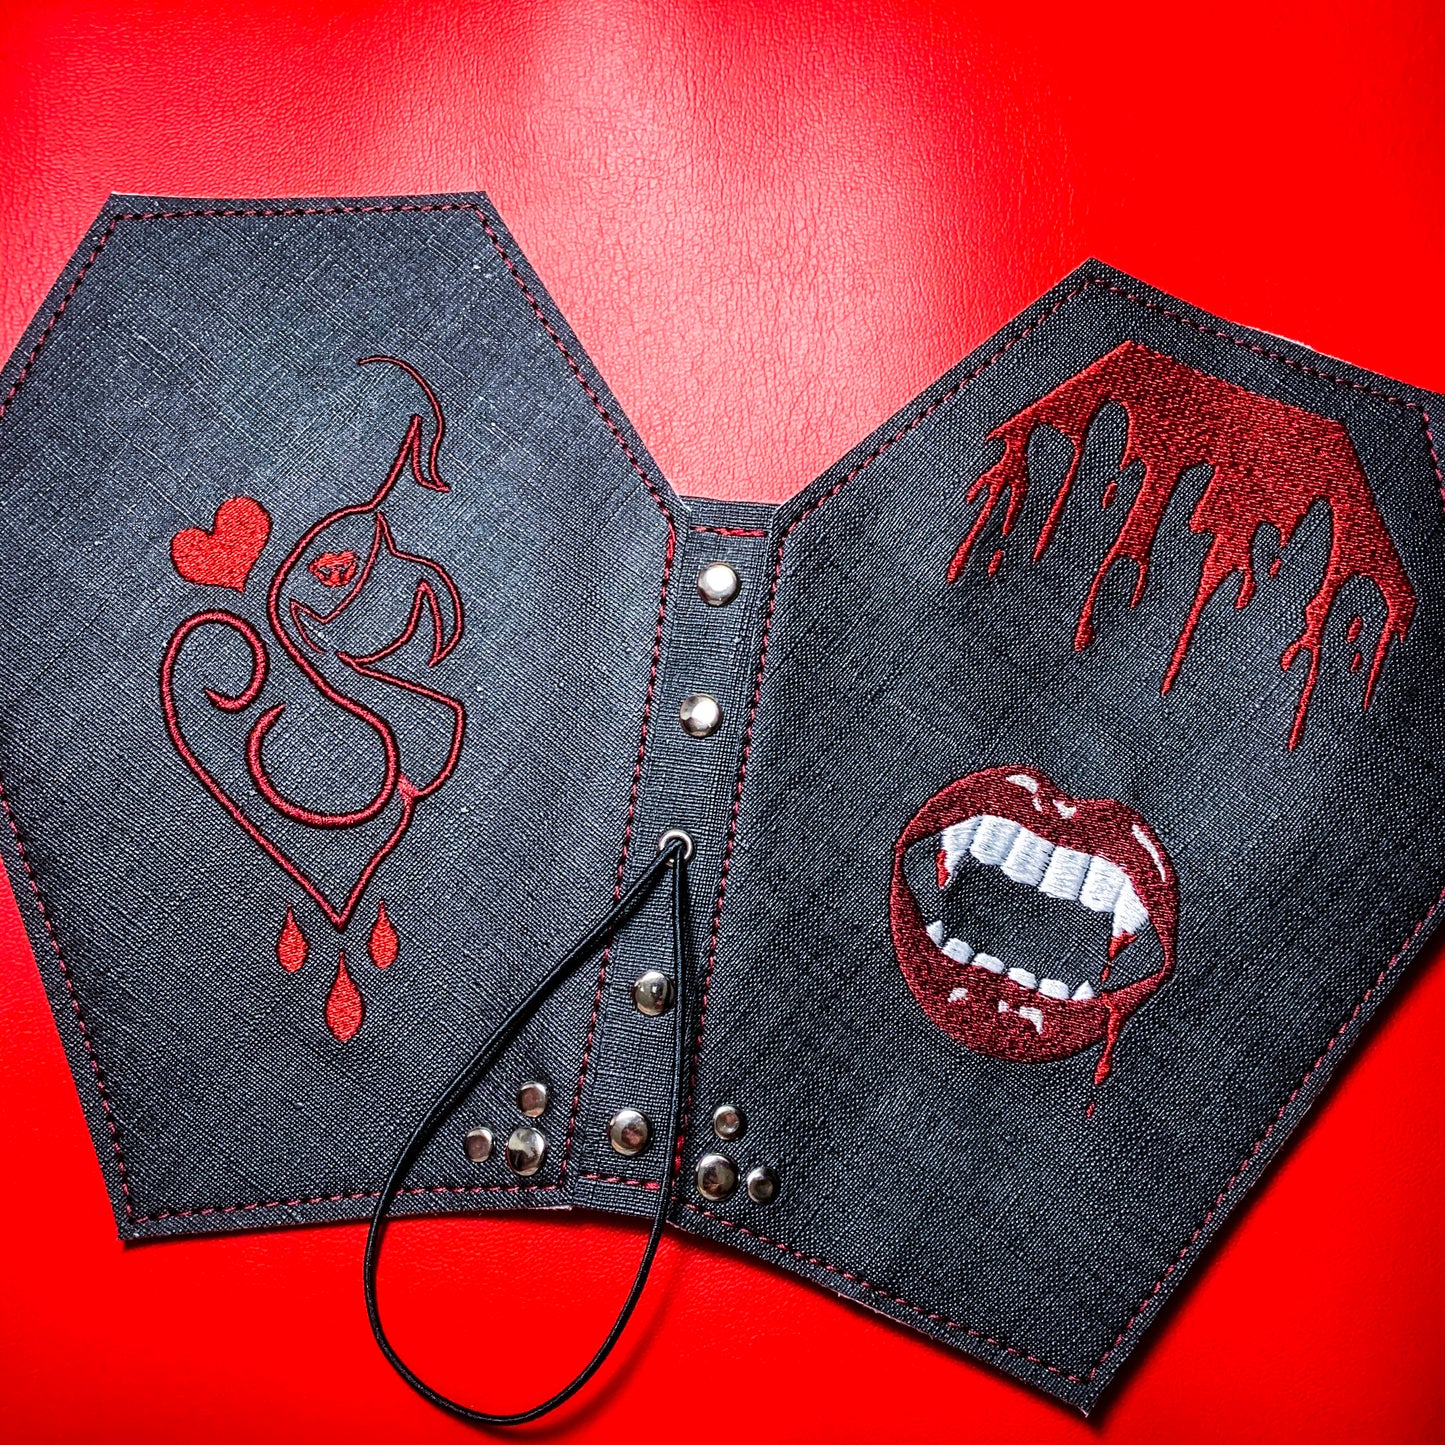 Coffin Vamp Cover - Fits Rockadeadly's "My Creepy Planner"